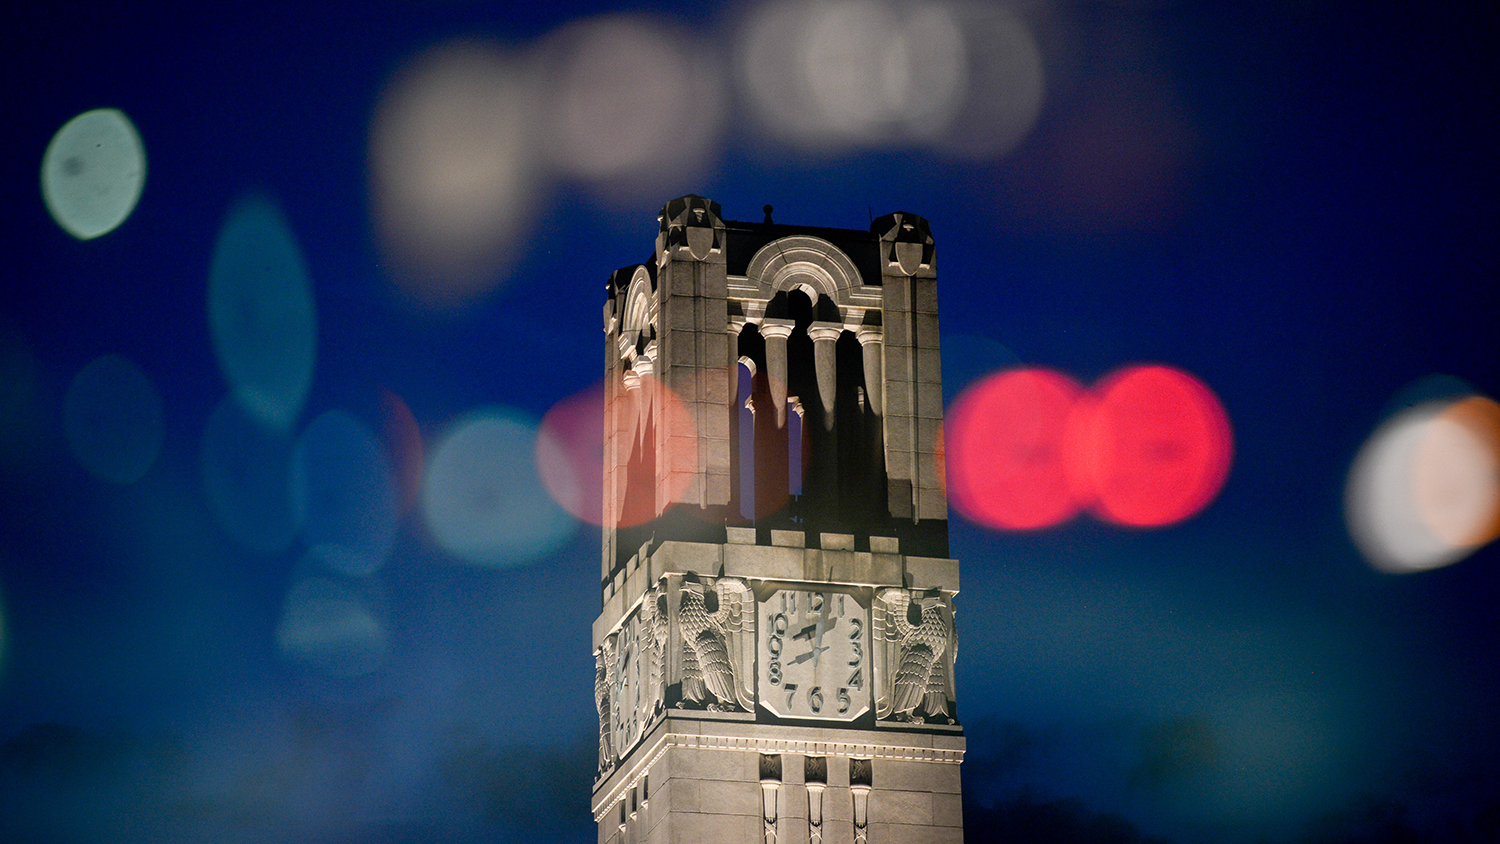 The NC State Belltower at dusk with colorful lights reflected around it